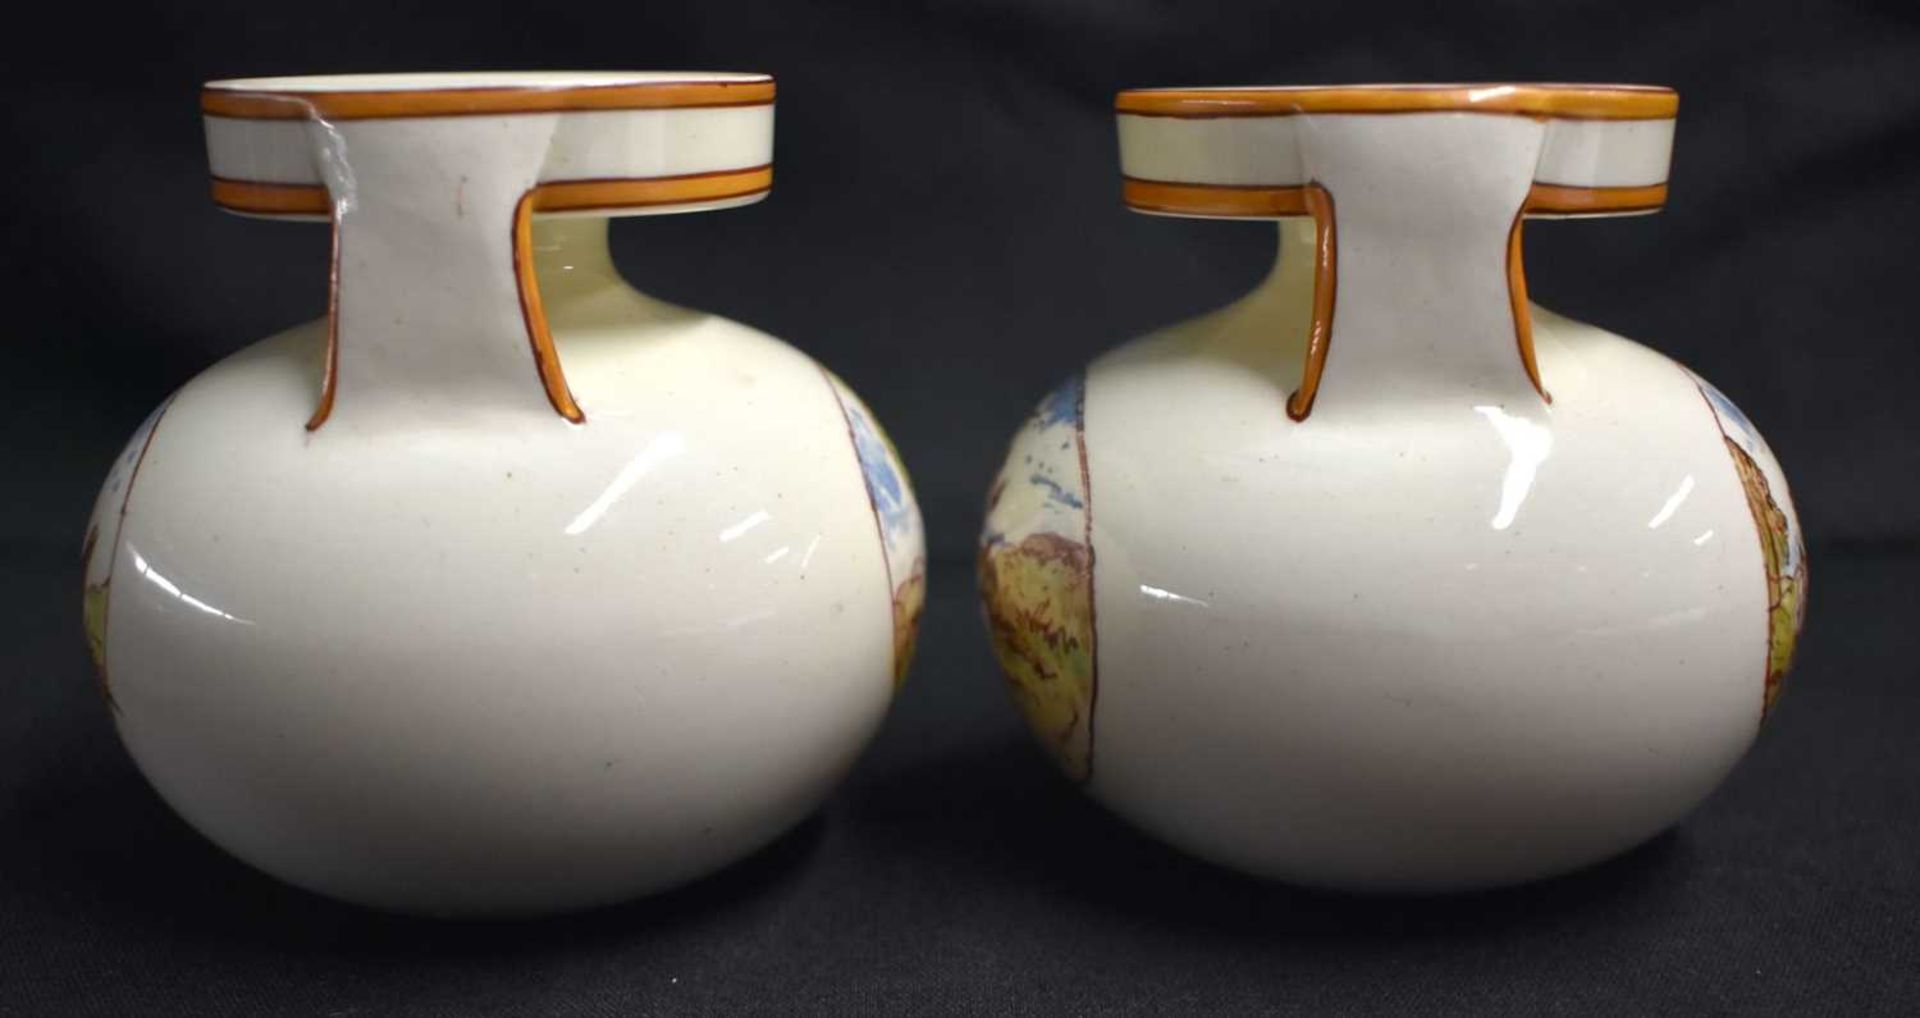 A RARE PAIR OF WEDGWOOD SINGLE HANDLED VASES by Emile Aubert Lessore, painted with rural scenes. 9 - Image 4 of 6